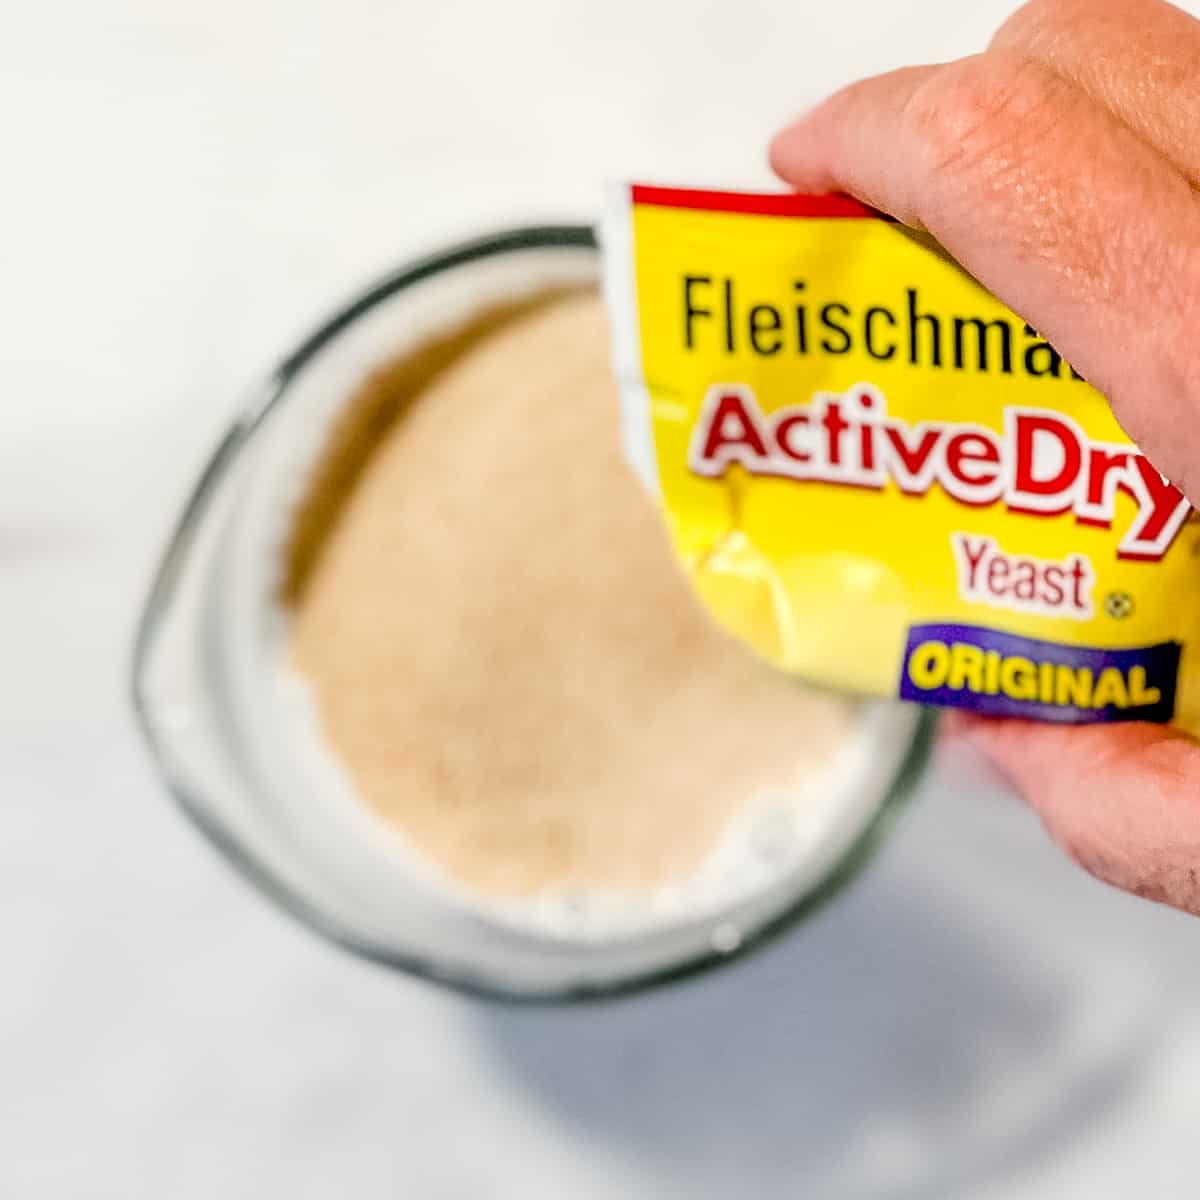 adding active dry yeast to a cup of warm milk.